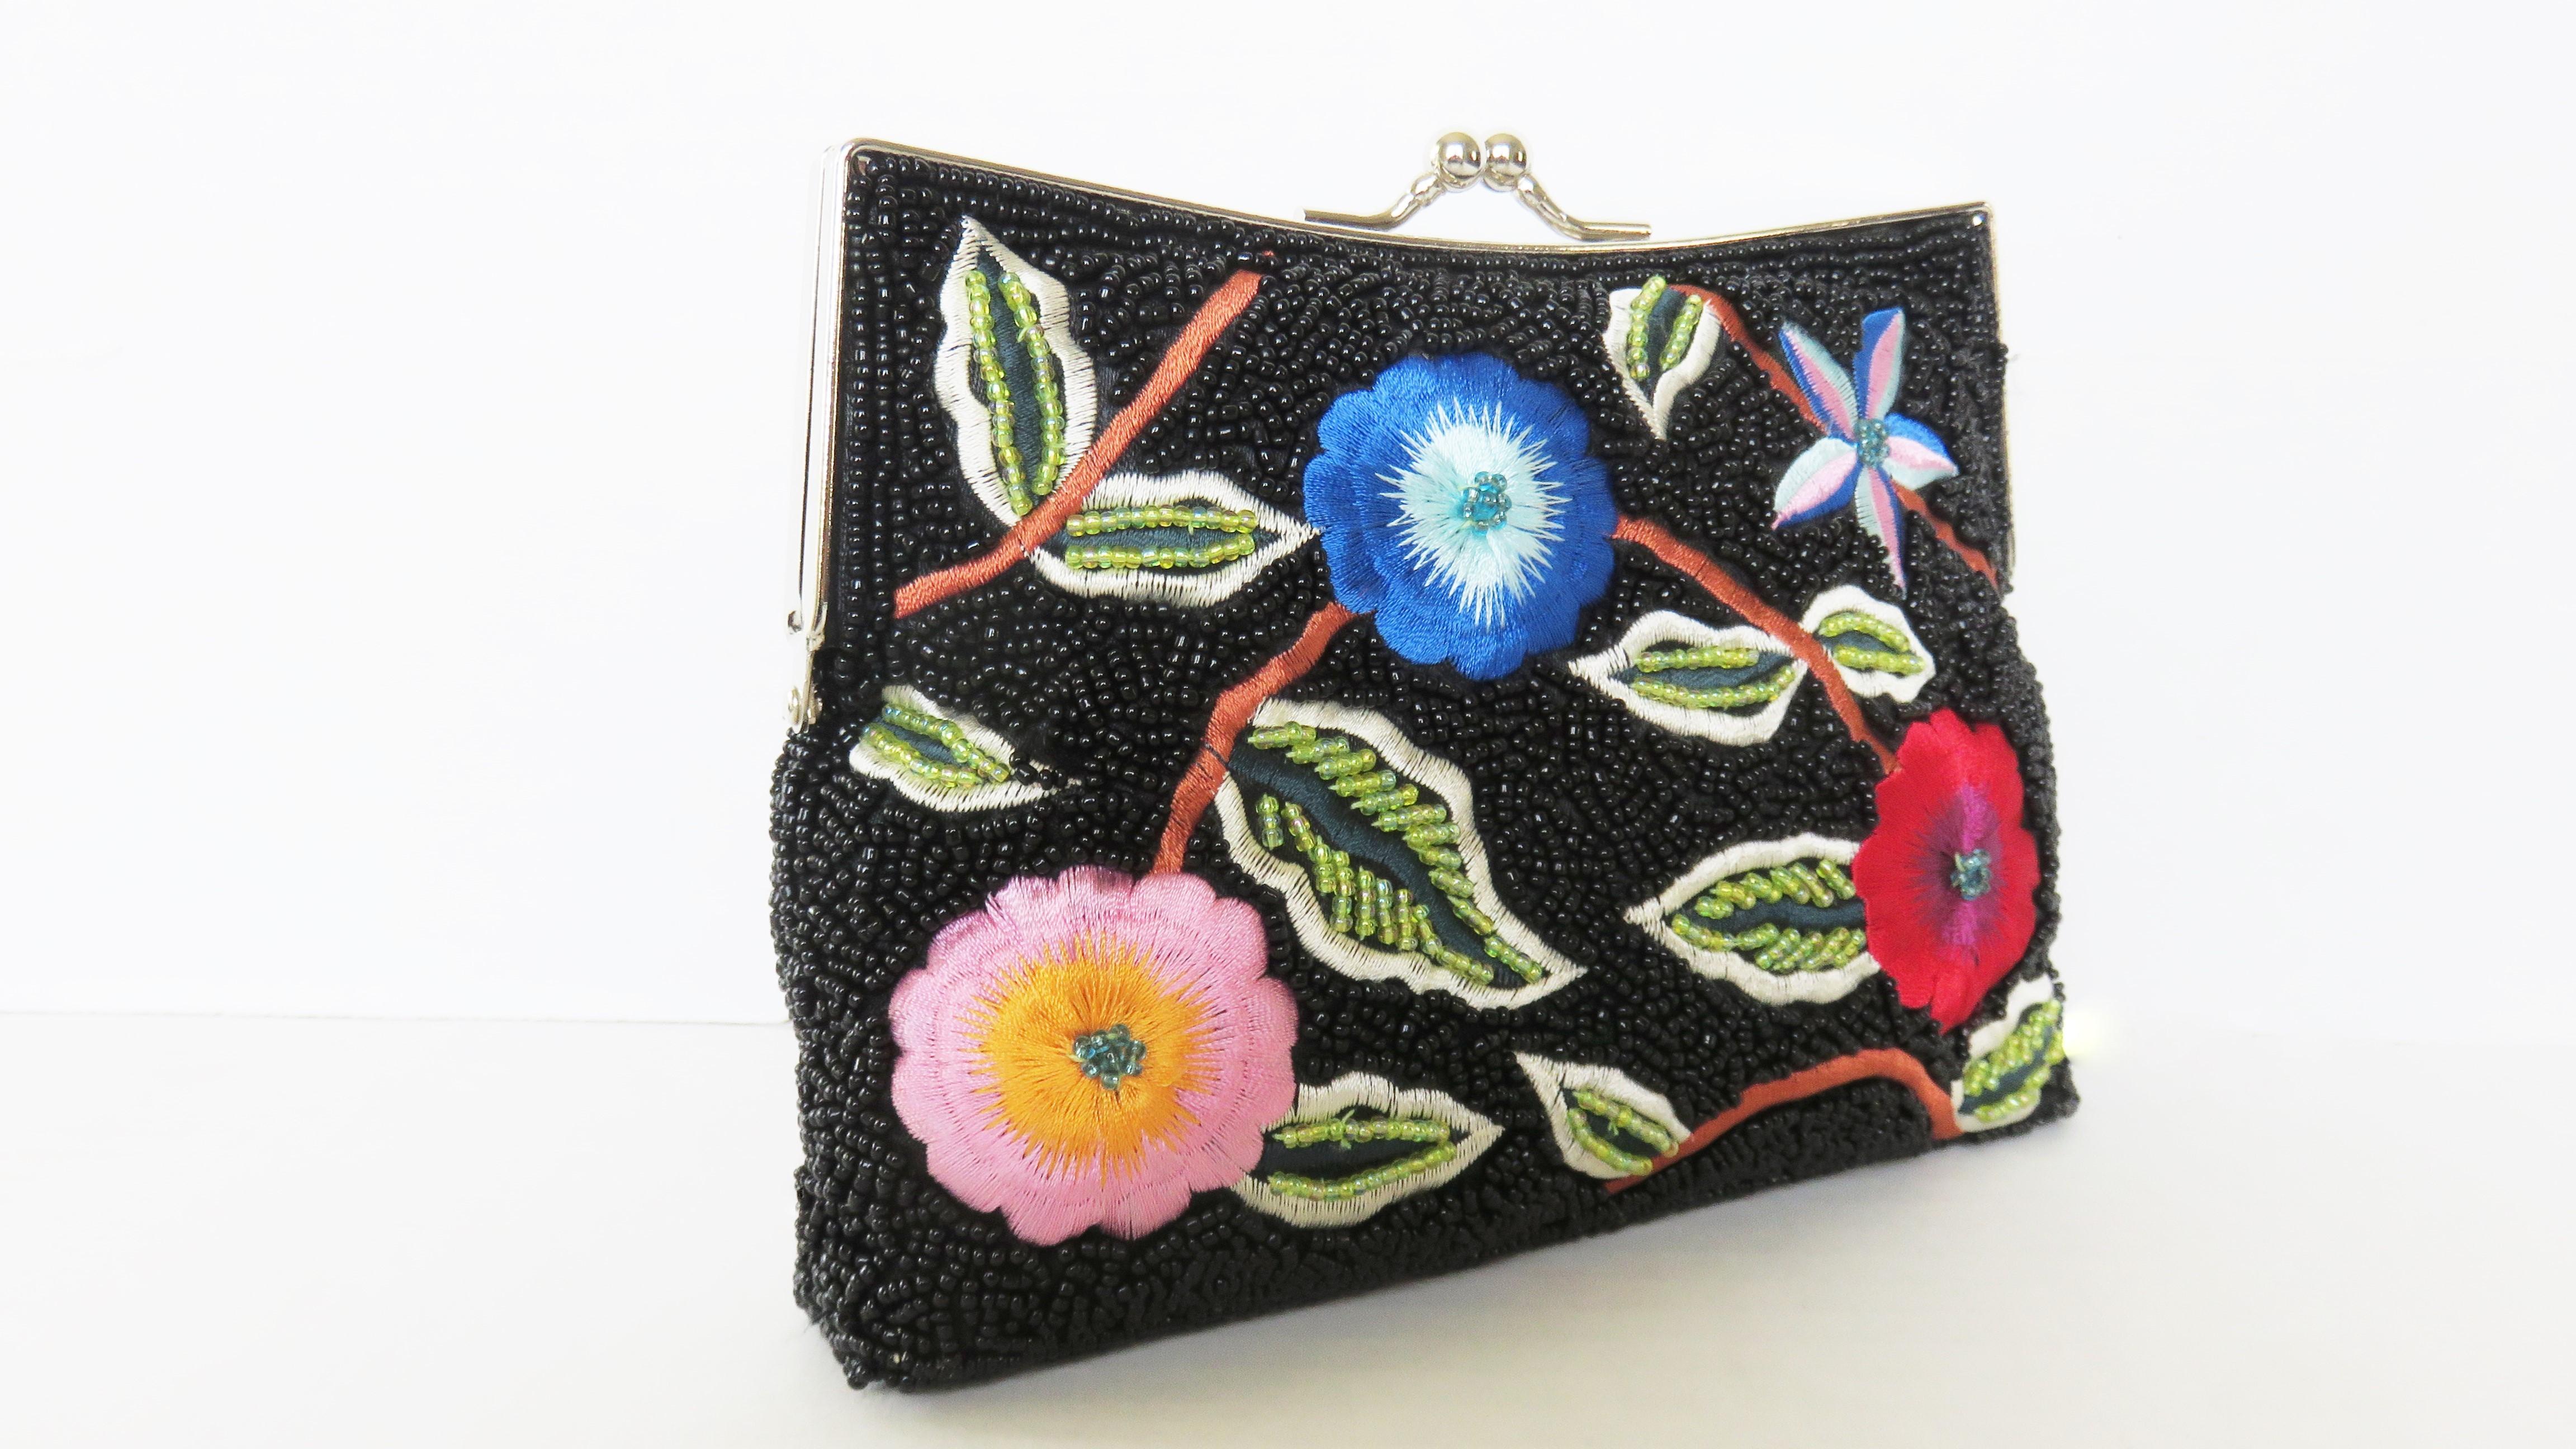 Women's Beaded and Embroidery Clutch with Optional Chain Shoulder Strap 1980s For Sale